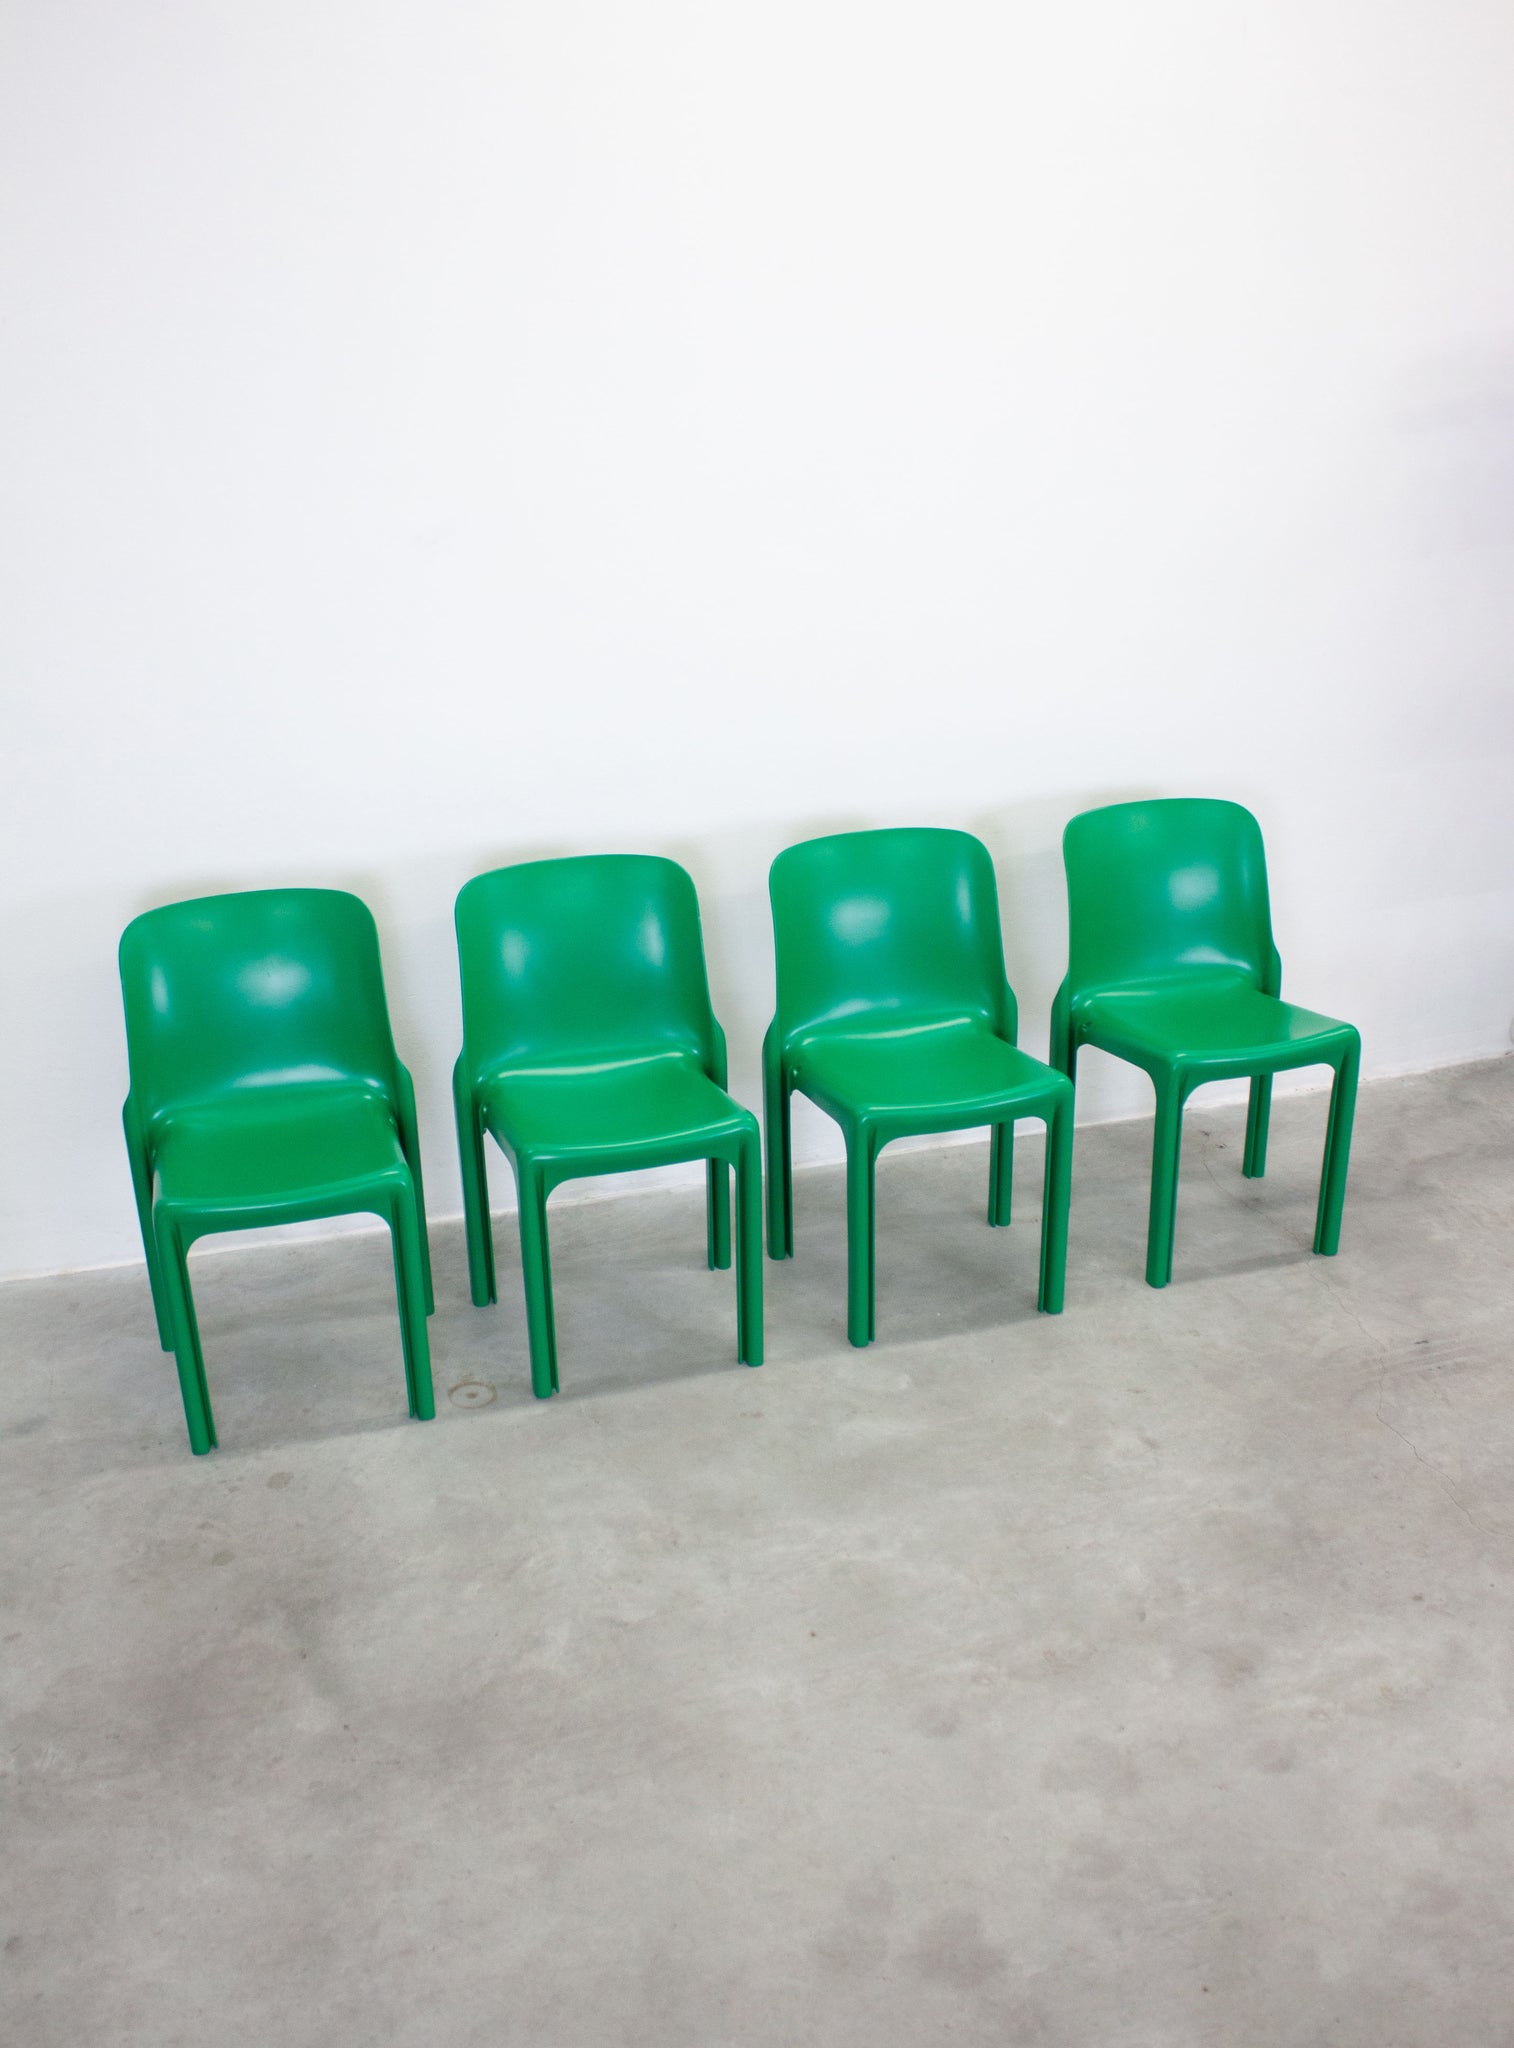 Artemide Selene Dining Chair by Vico Magistretti (Green)